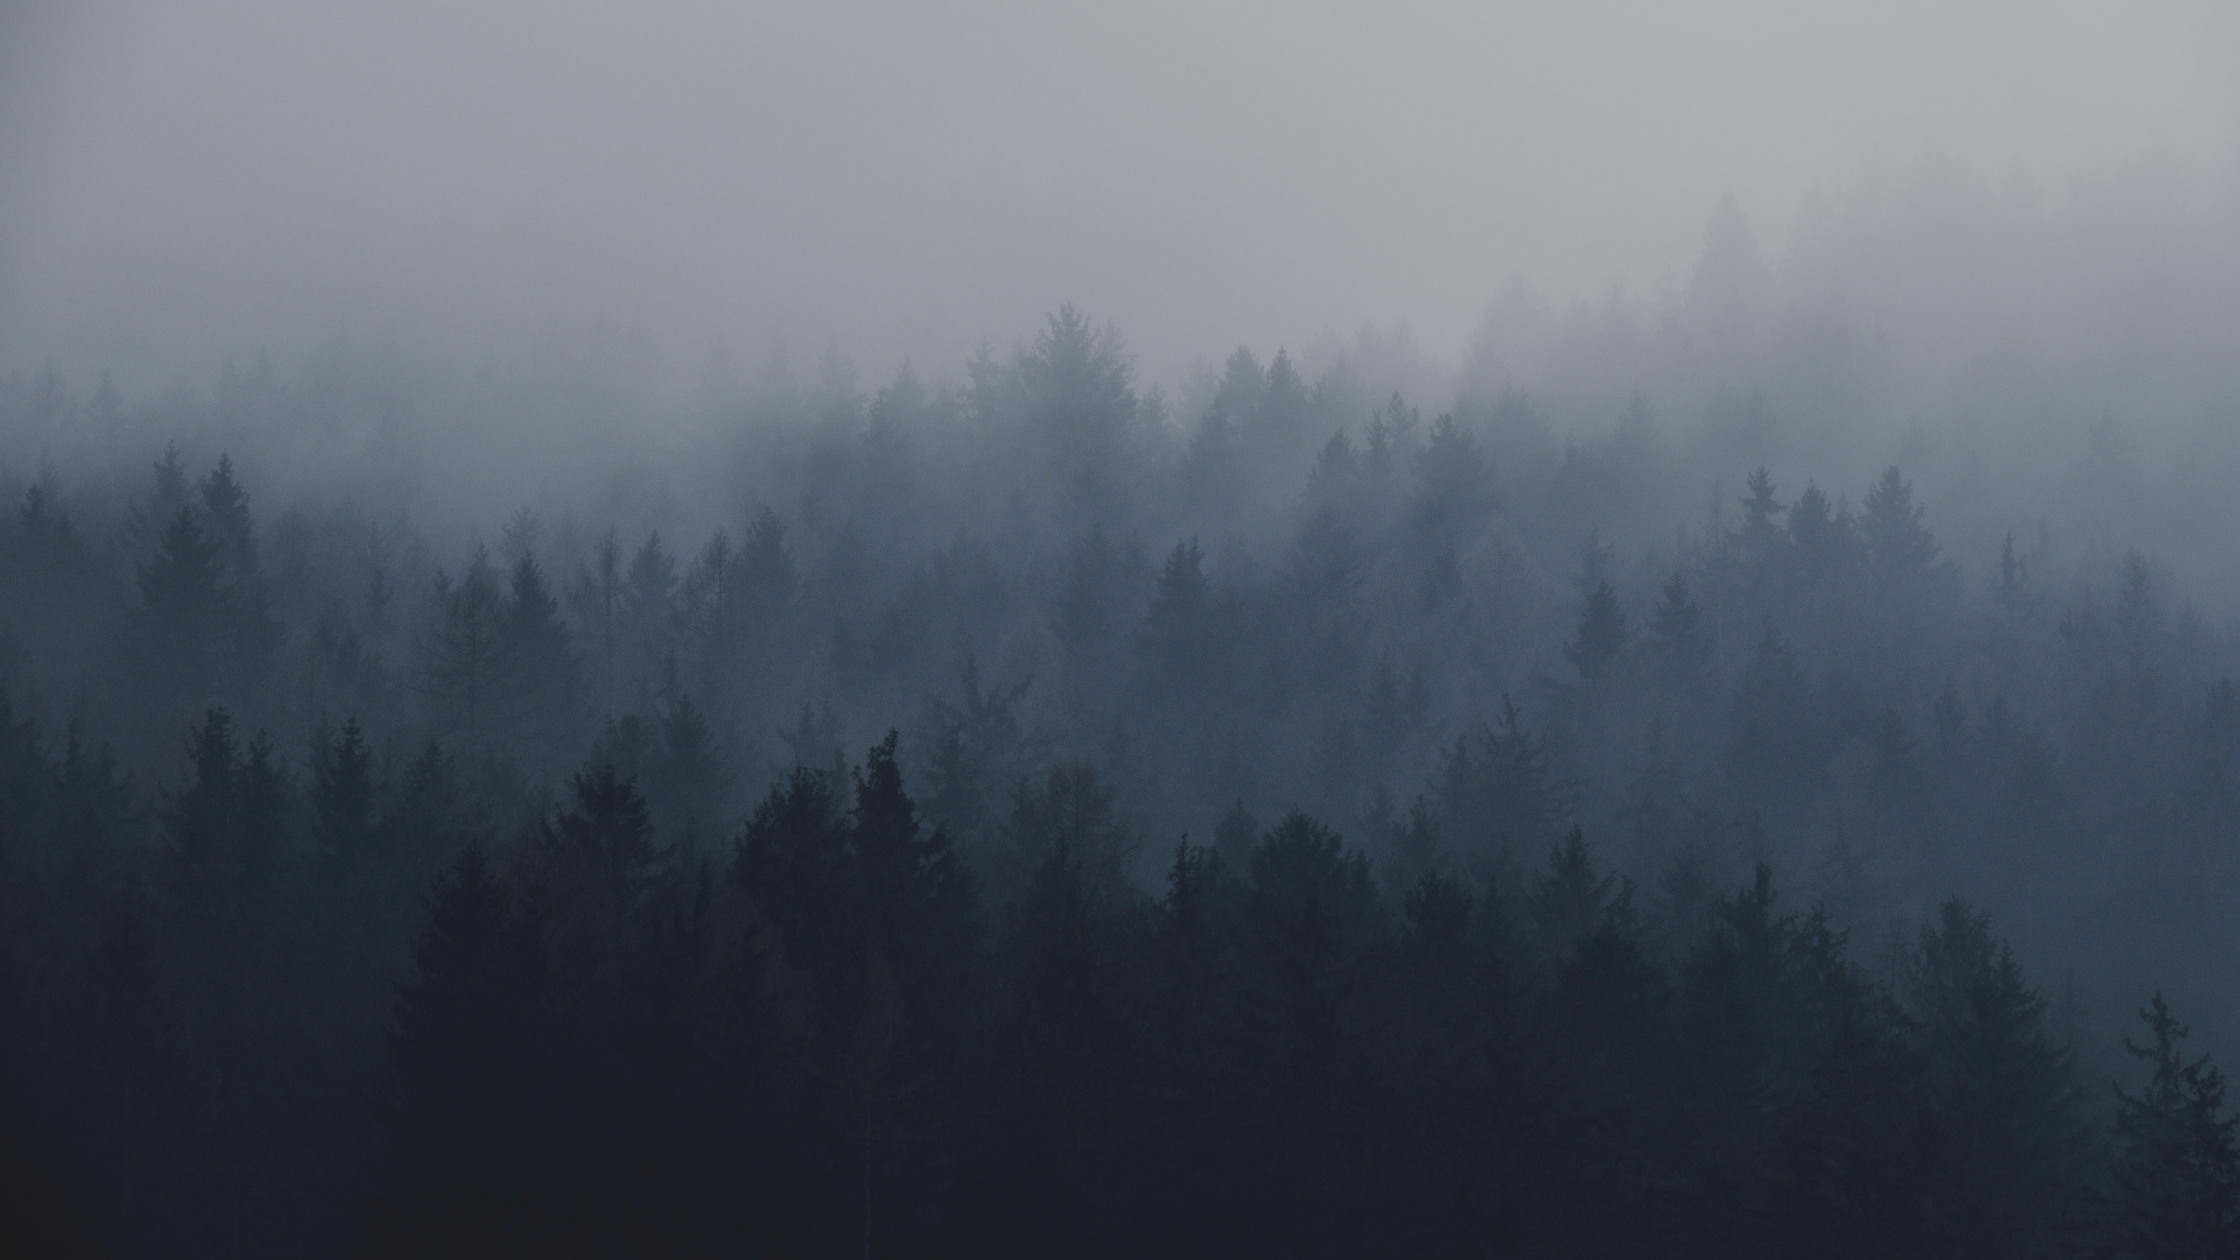 A foggy pine forest